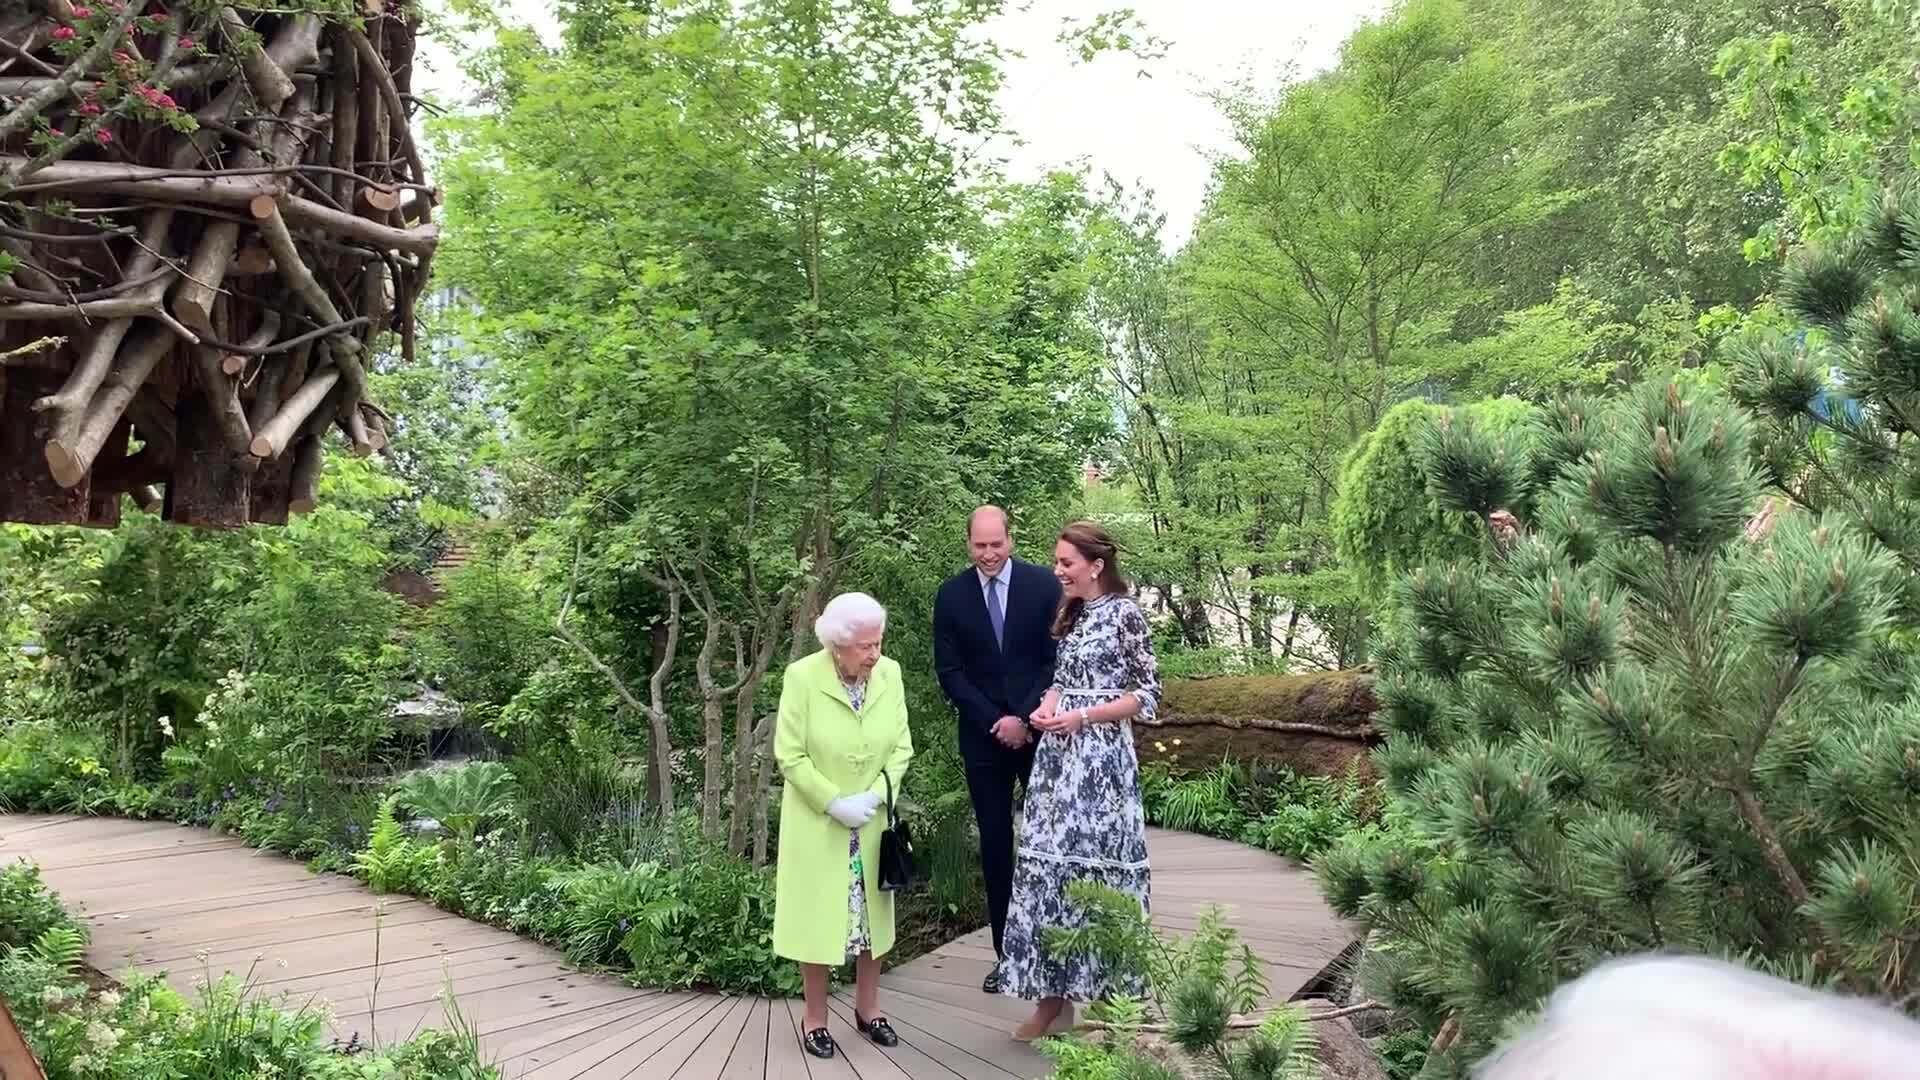 chelsea flower show tickets 2019 and 2020: dates, weather, schedule